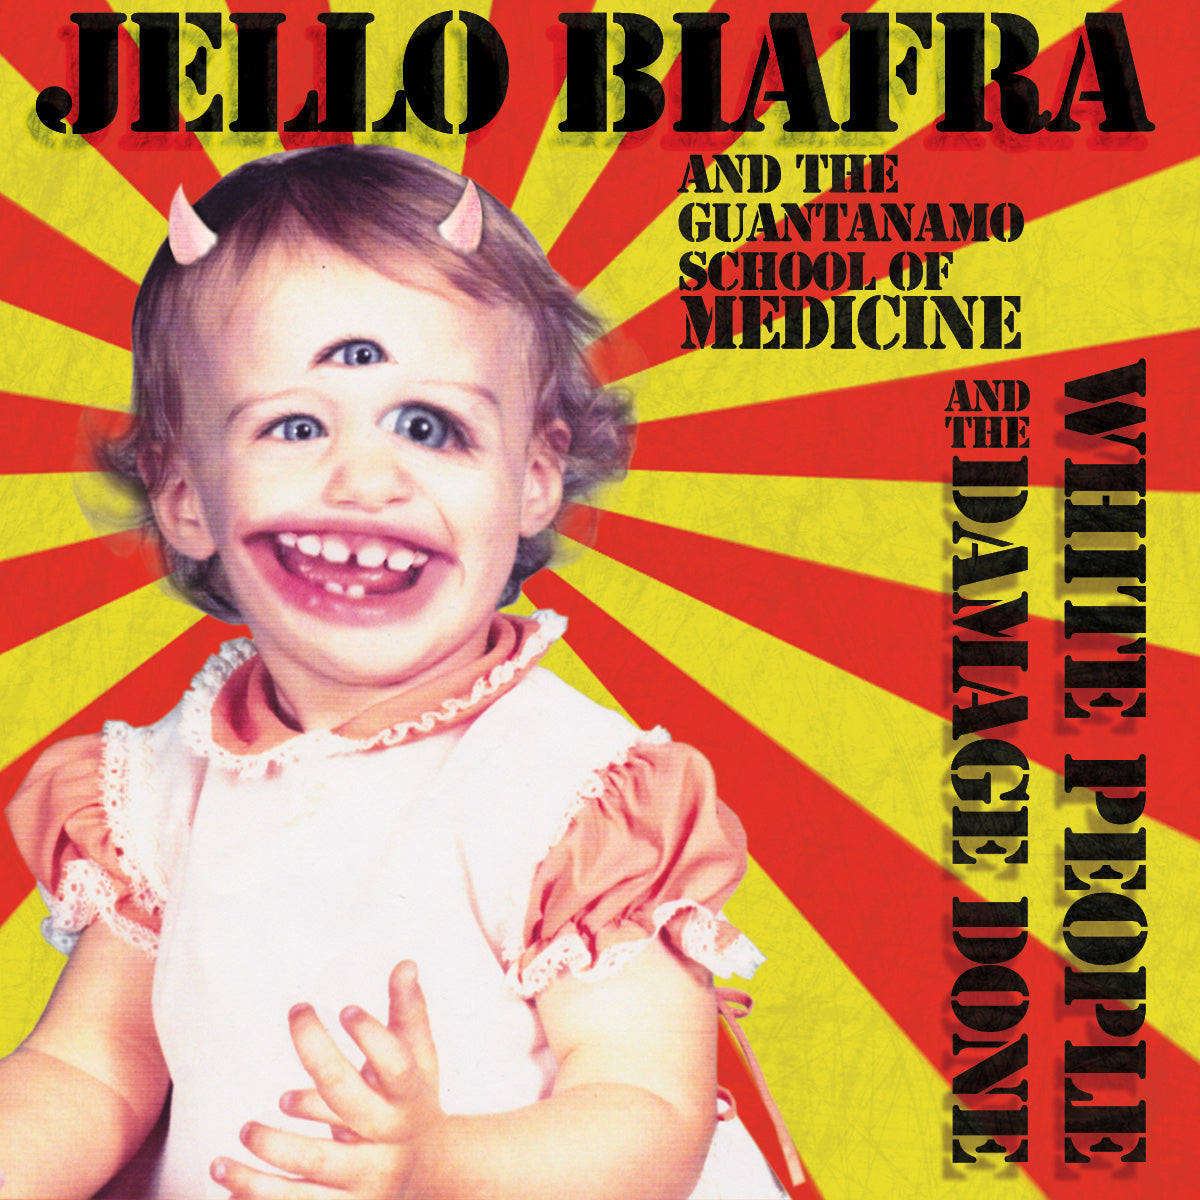 v450 - Jello Biafra And The Guantanamo School Of Medicine - "White People And The Damage Done"